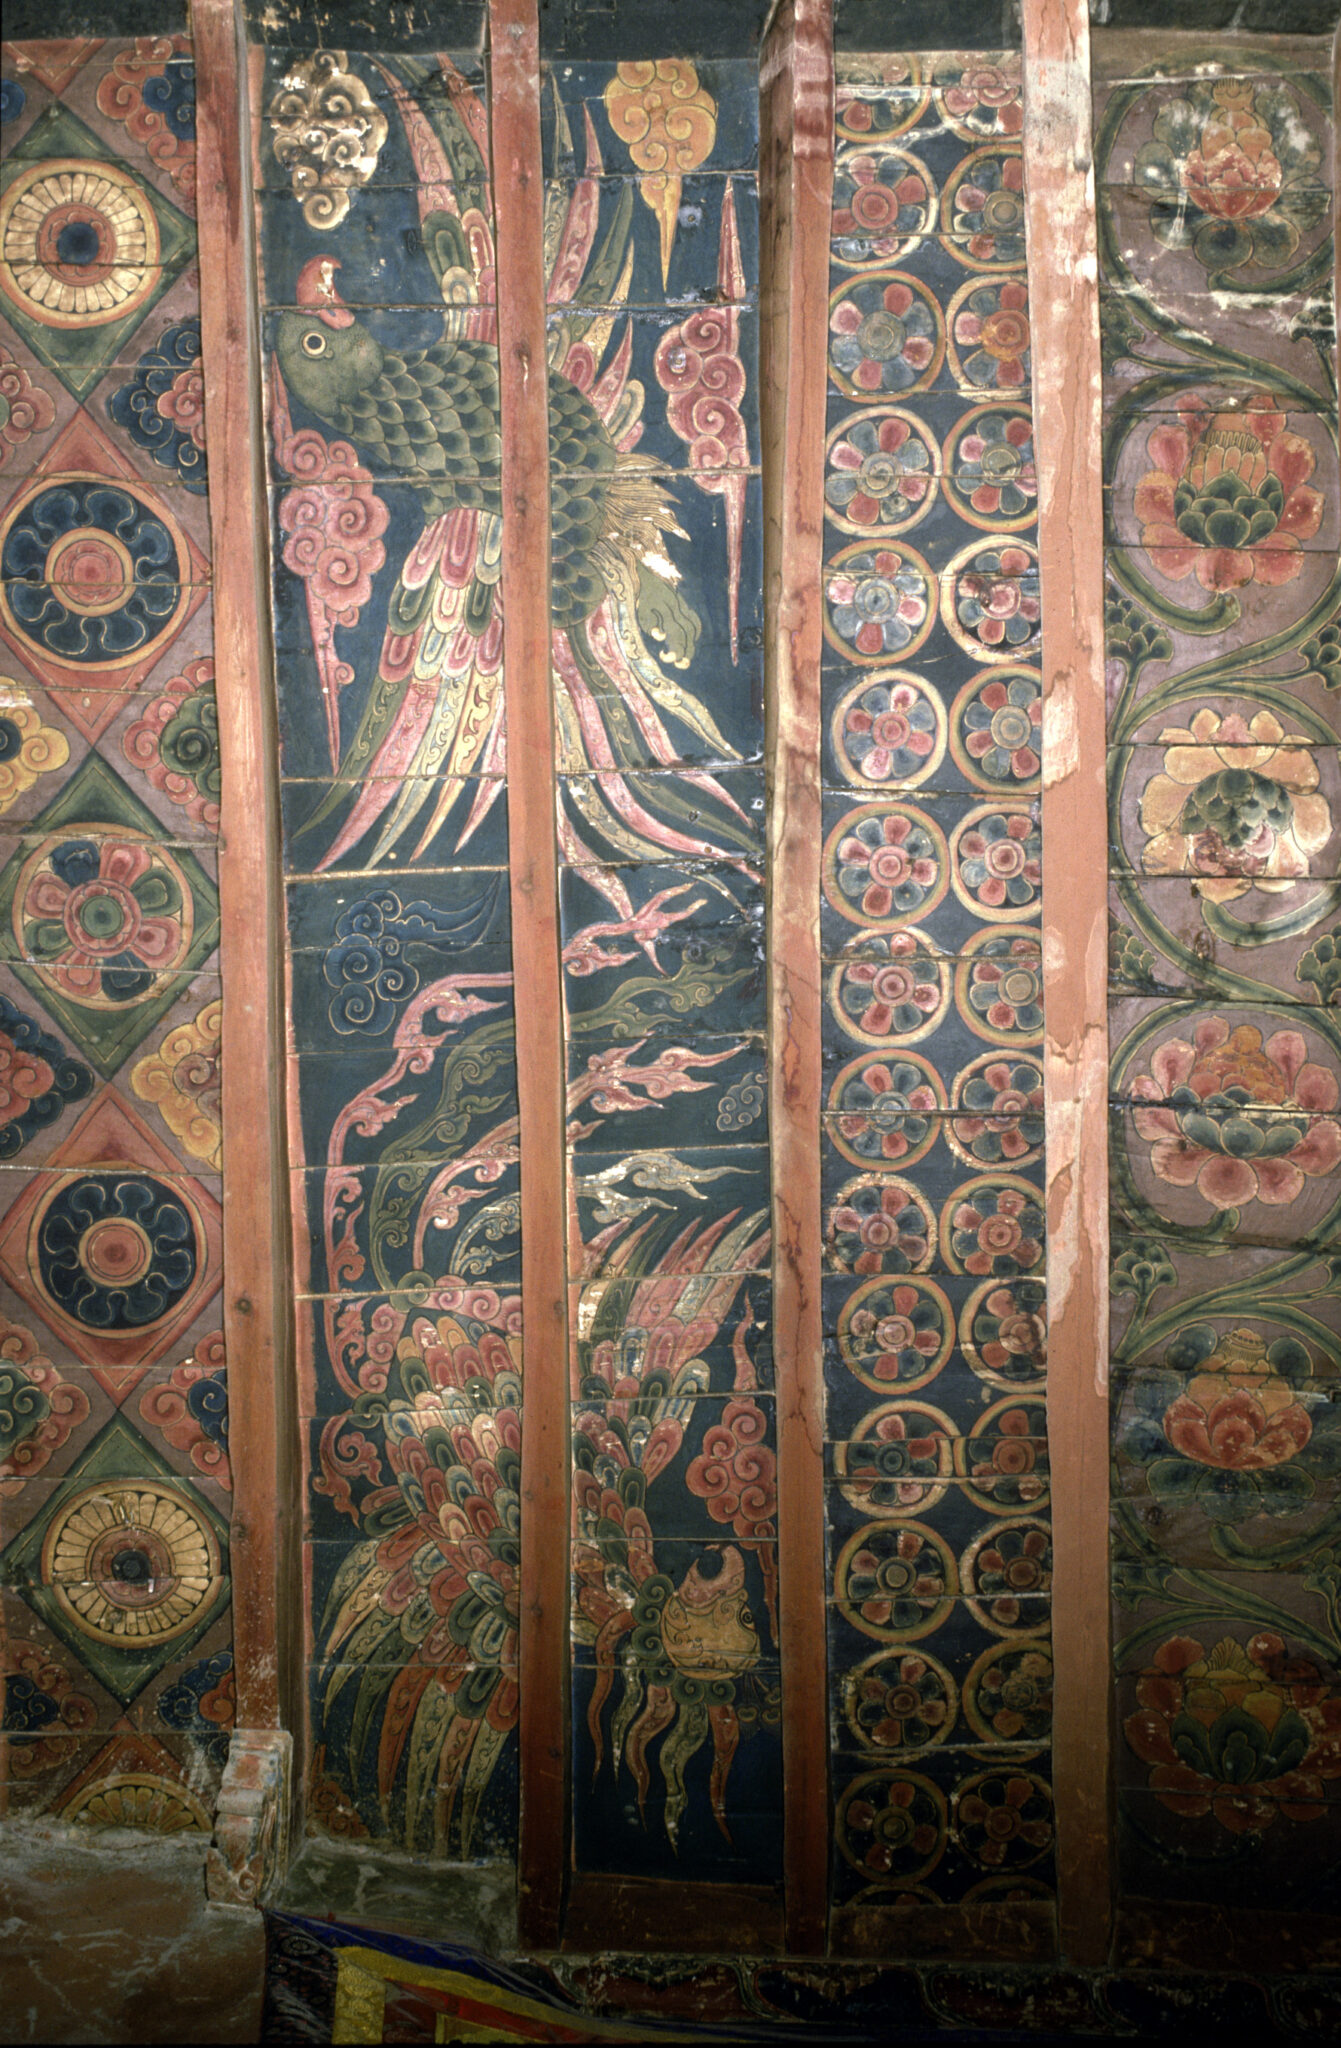 Timber ceiling featuring richly decorated panels: geometric designs, two fantastical birds, roundels, and floral motifs